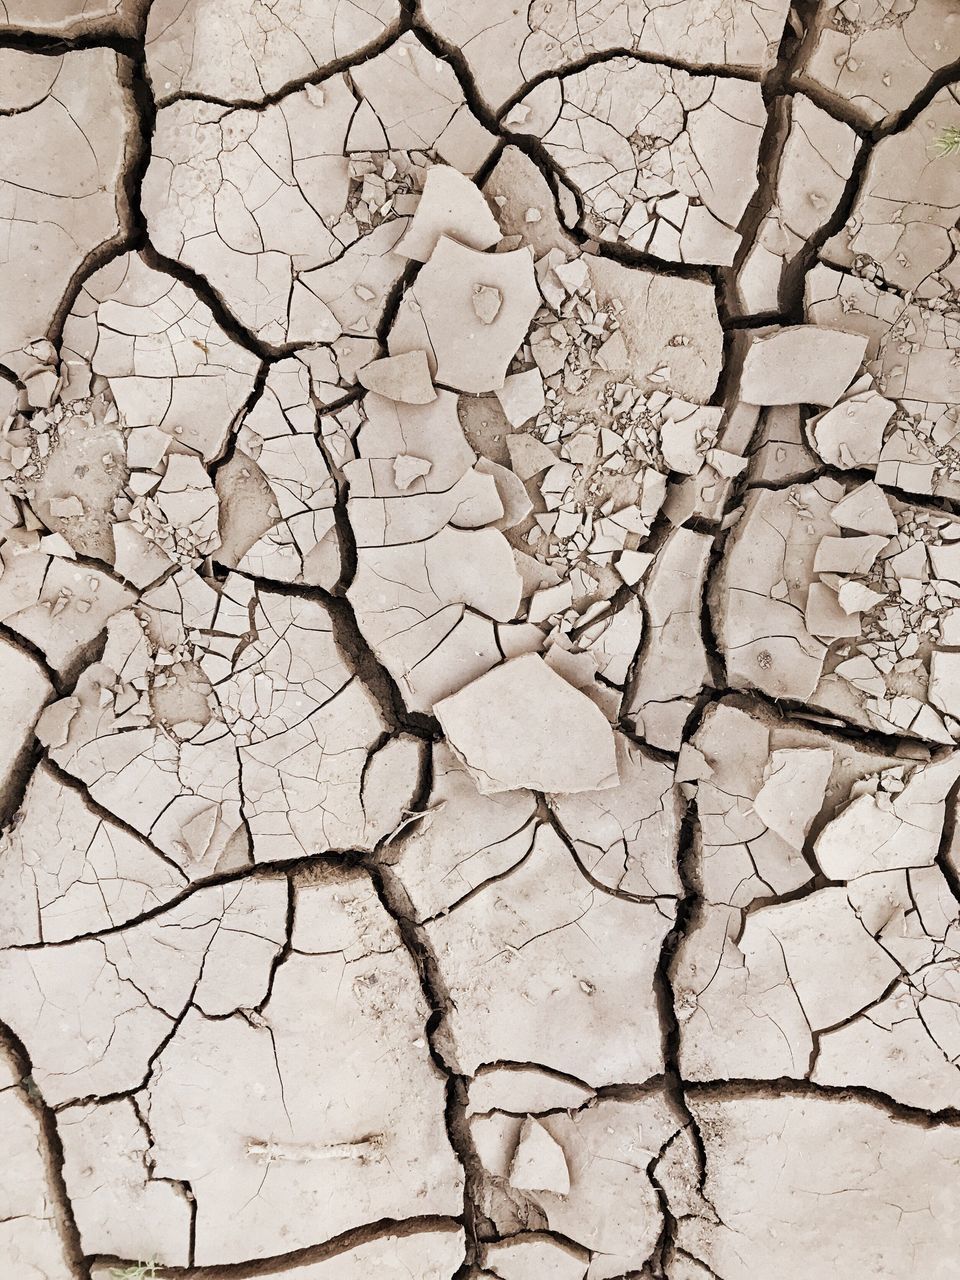 cracked, drought, environment, land, environmental issues, arid climate, global warming, textured, dry, extreme terrain, nature, backgrounds, environmental damage, bad condition, barren, mud, landscape, pattern, physical geography, summer, close-up, desert, human body part, day, outdoors, people